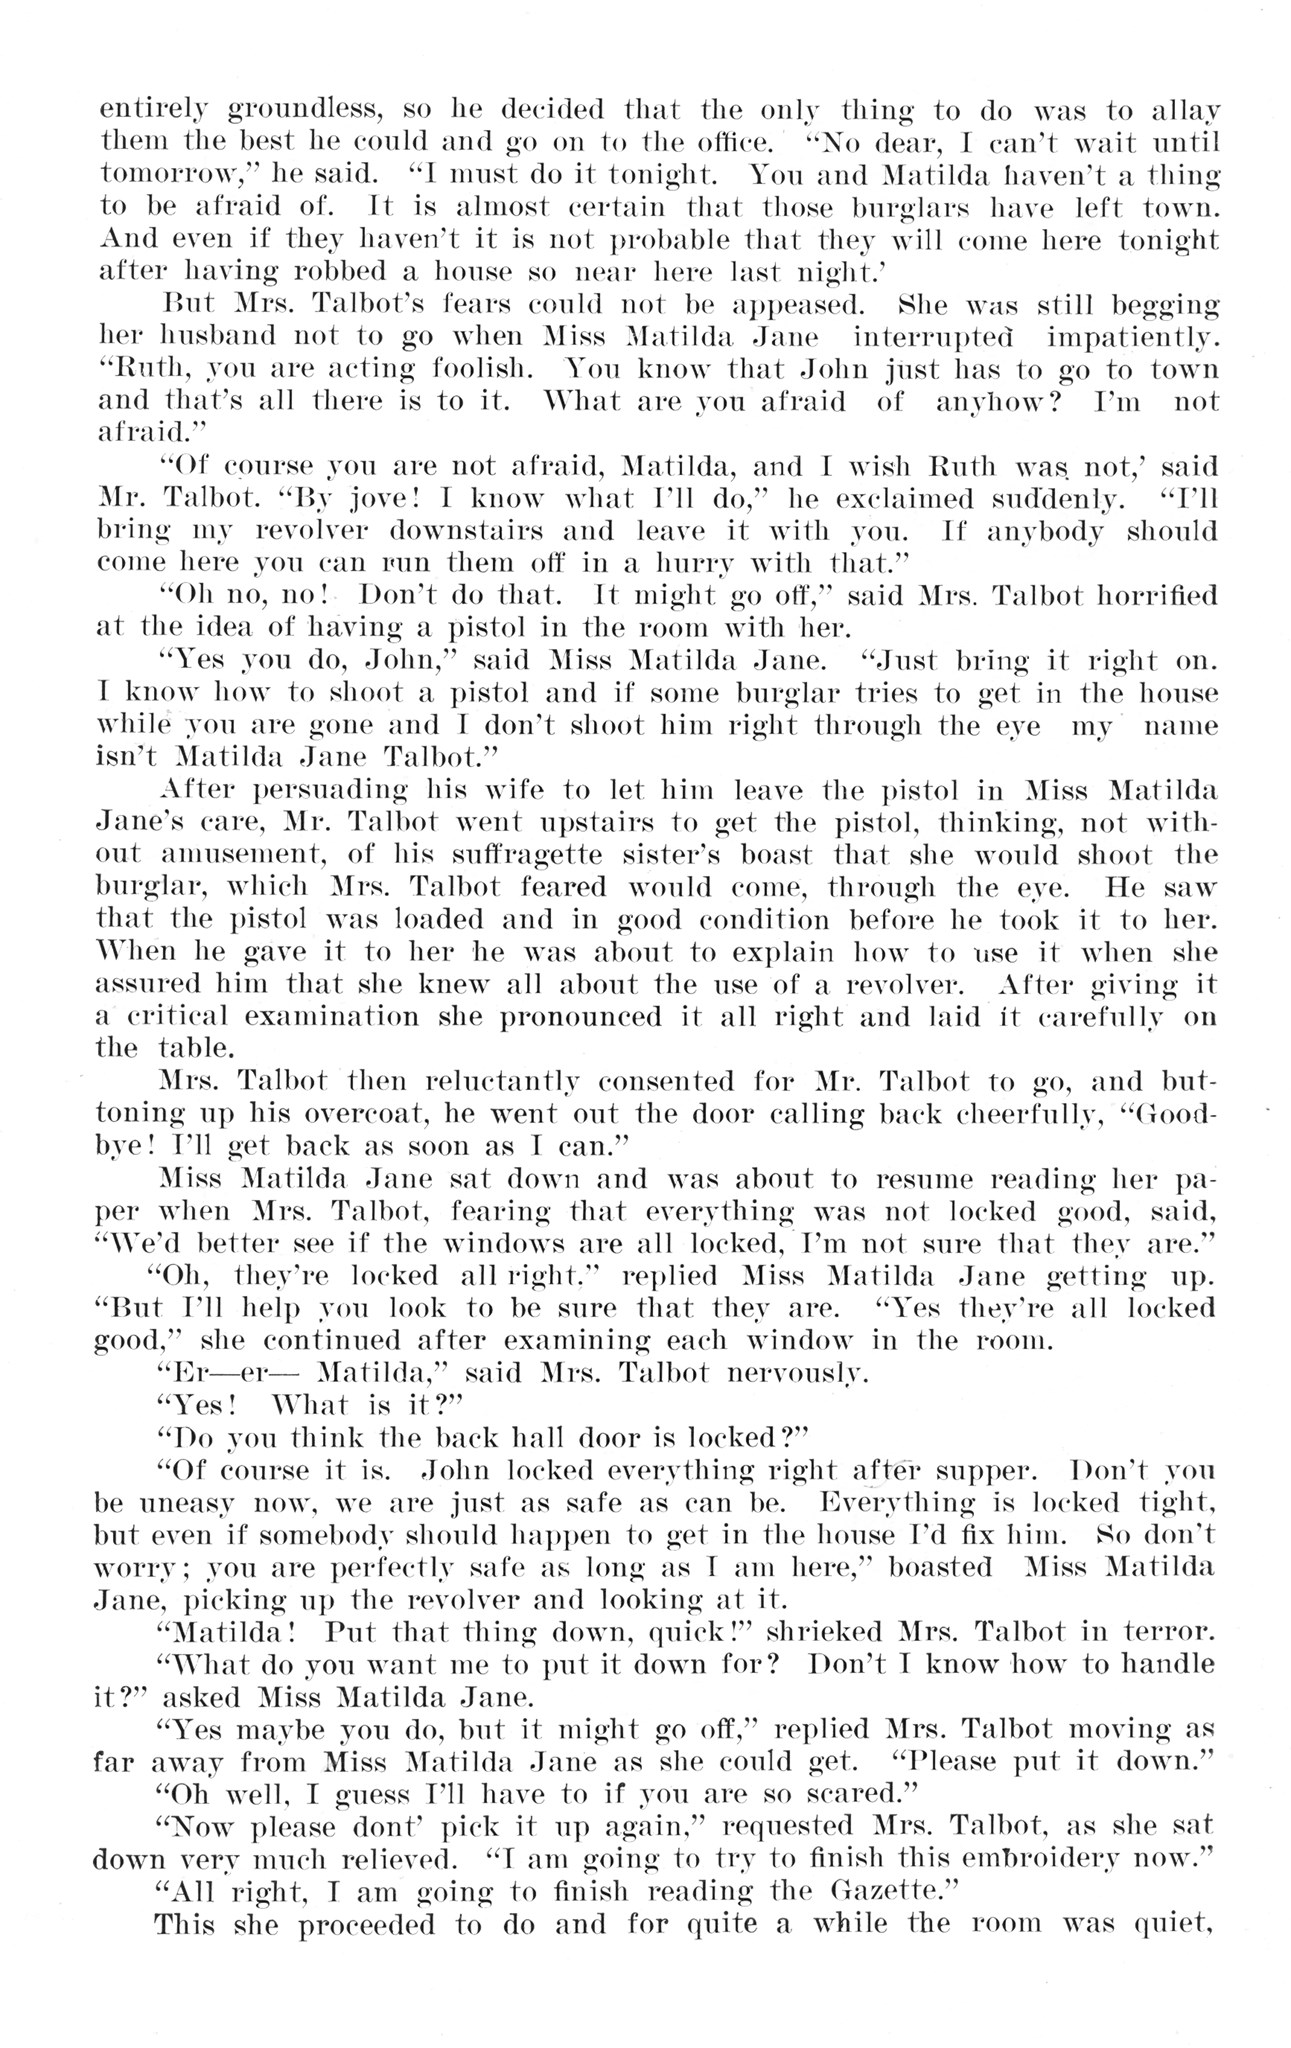 ../../../Images/Large/1913/Arclight-1913-pg0078.jpg